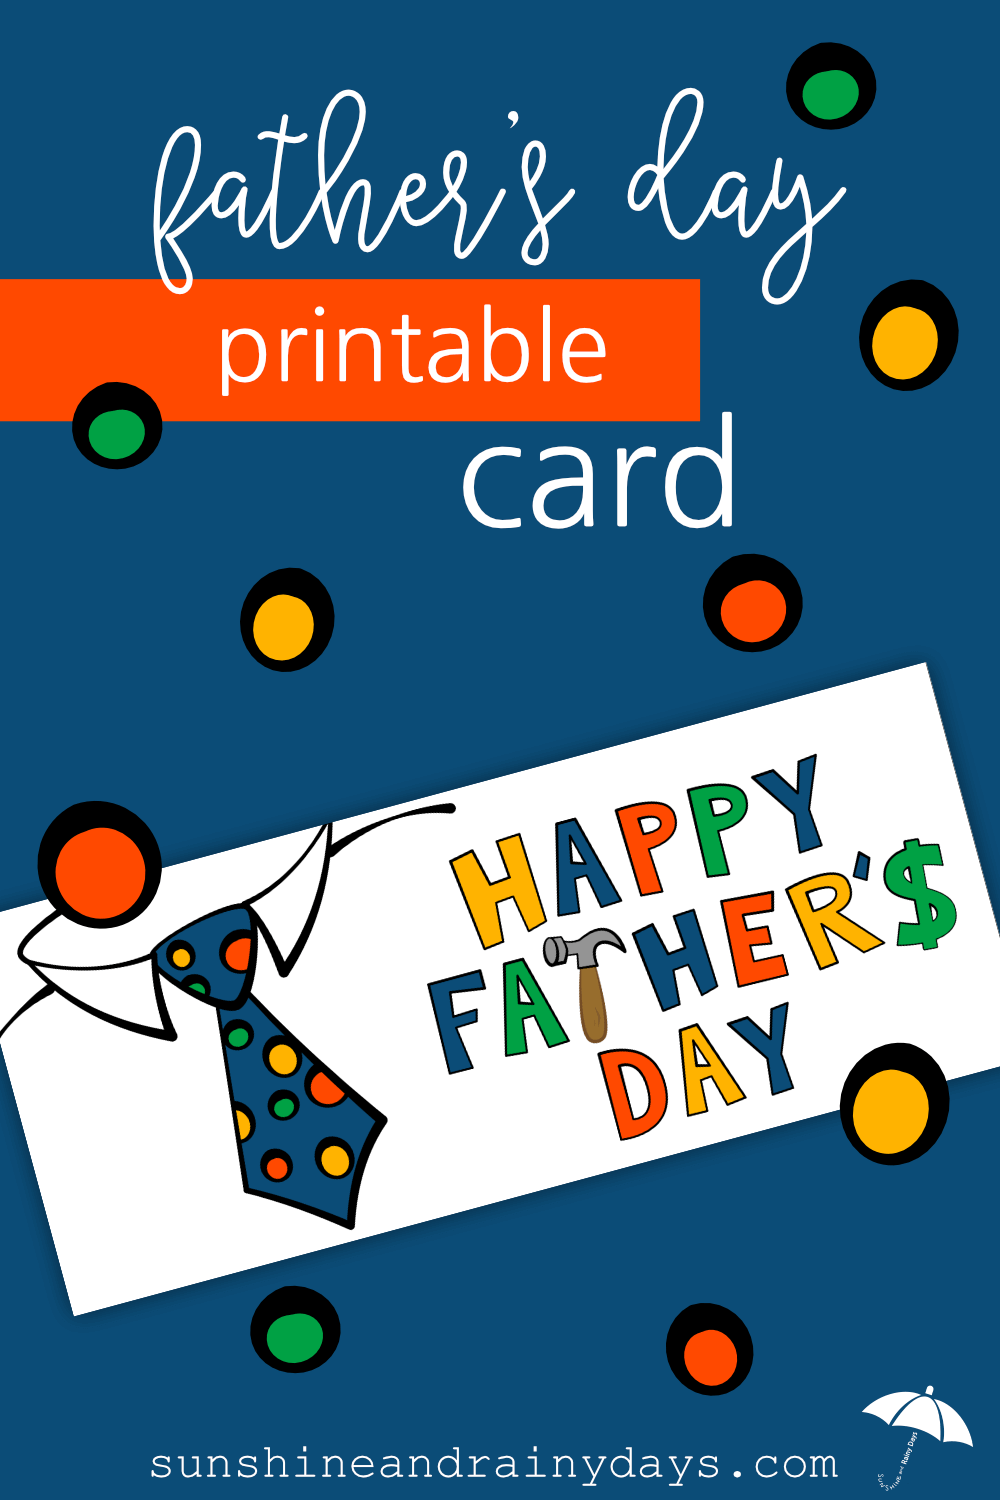 Father's Day Card (PDF)